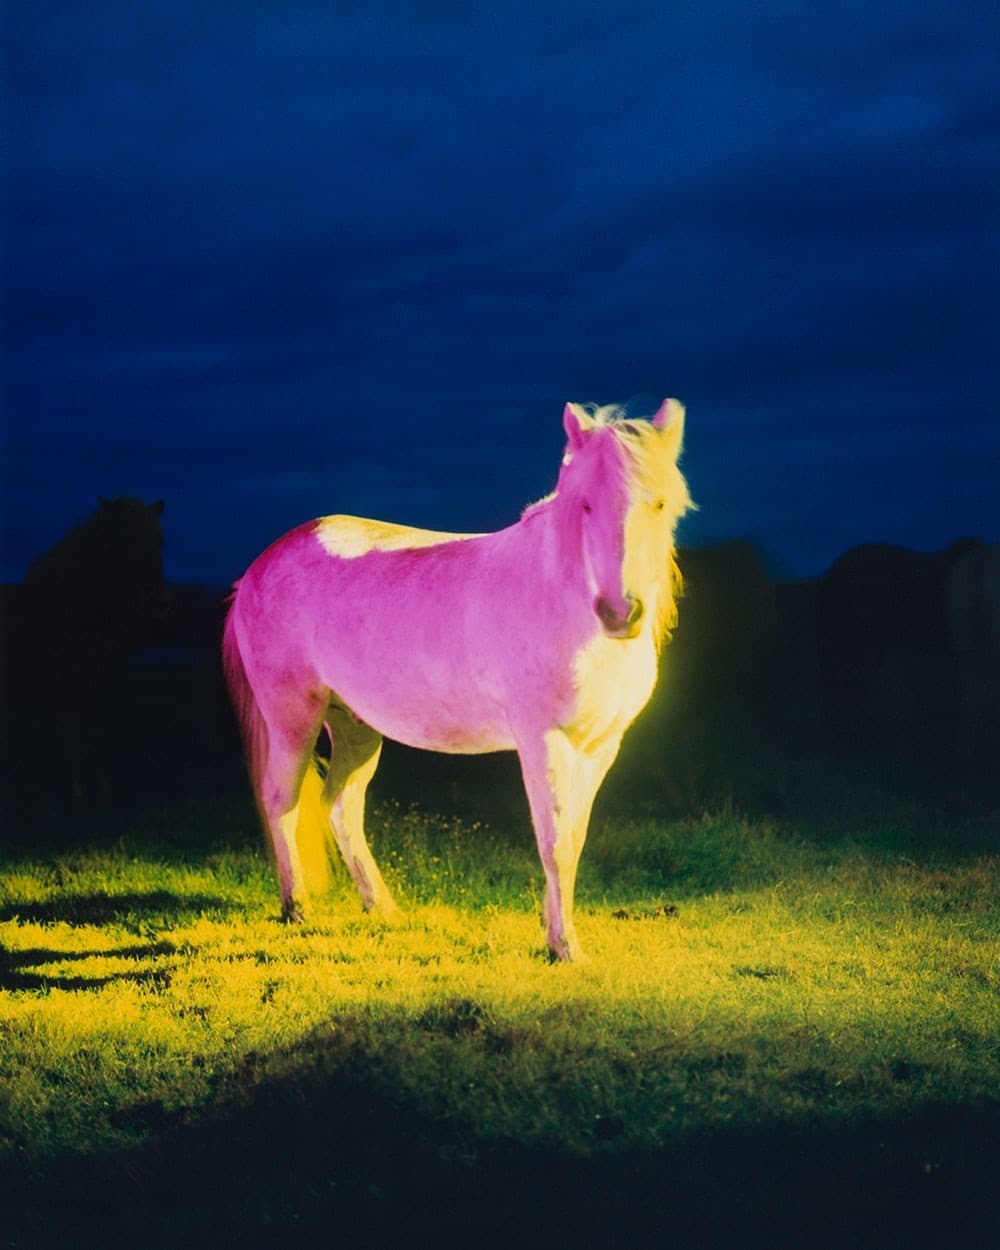 Meeting in Hues: Gareth McConnell’s ‘The Horses’